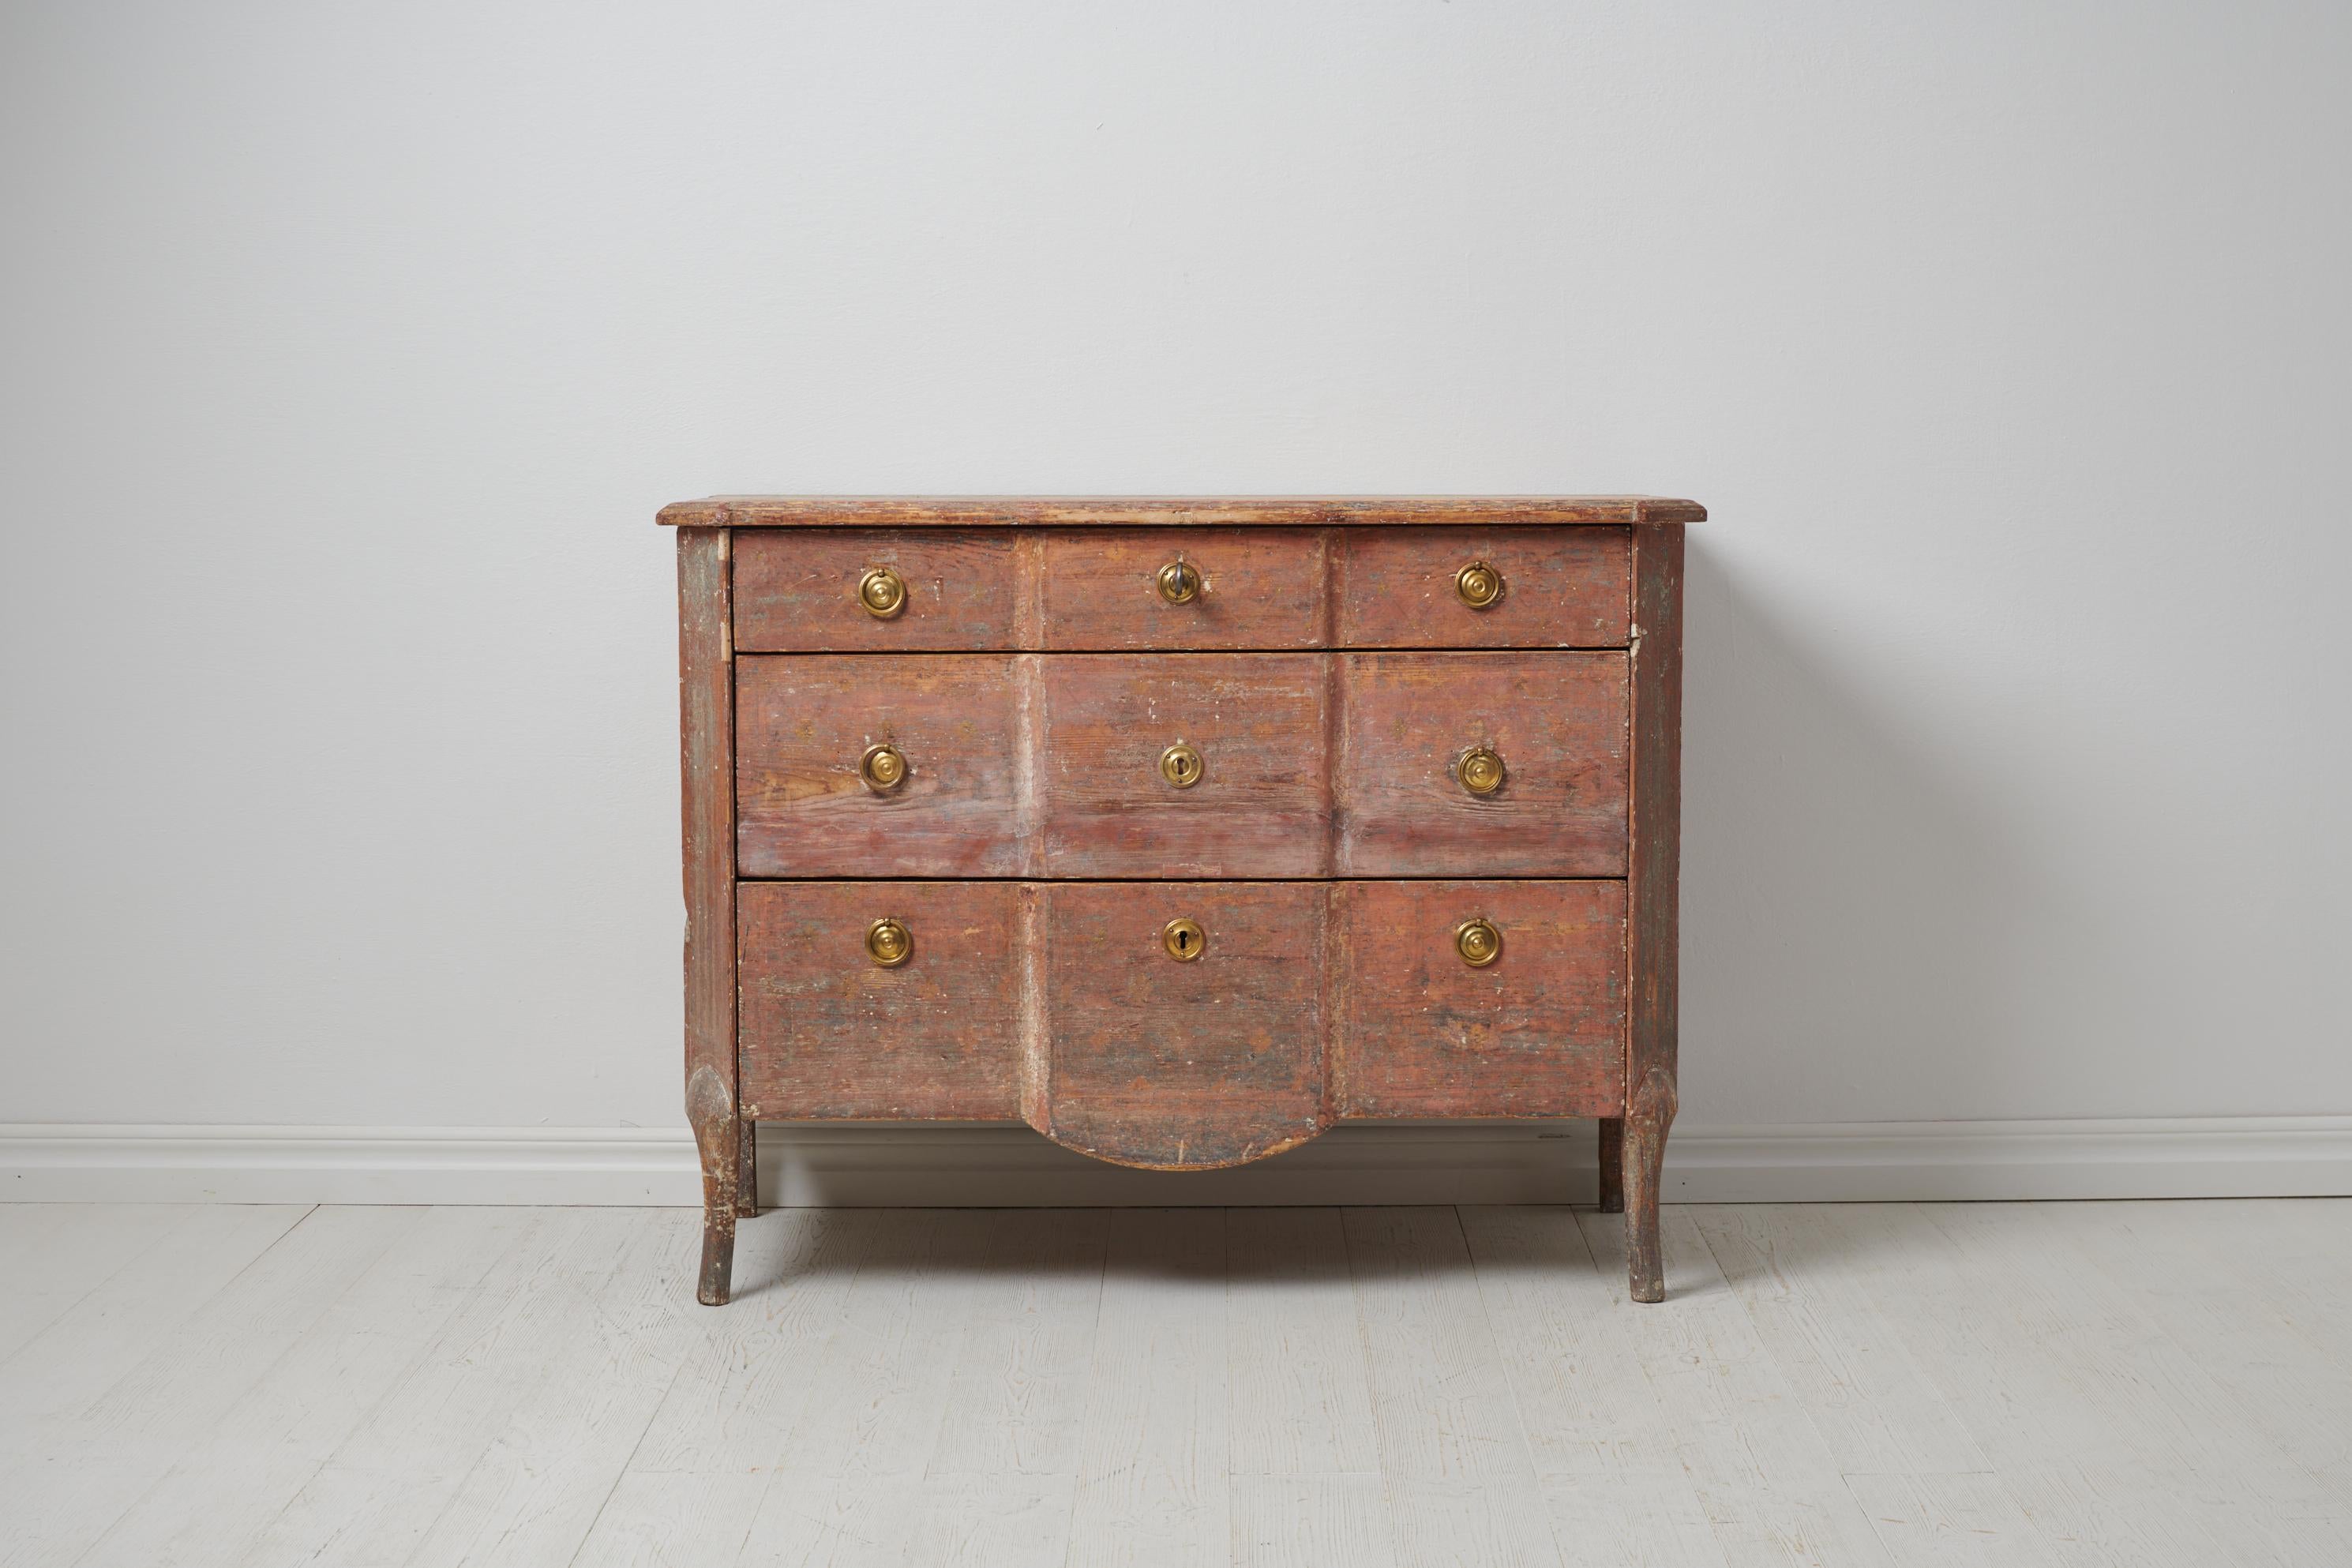 Genuine Swedish gustavian commode made around 1790 in painted pine. The commode has the original paint which has become worn and distressed over time. The pine underneath shines through in places and creates the unique patina. The commode has old